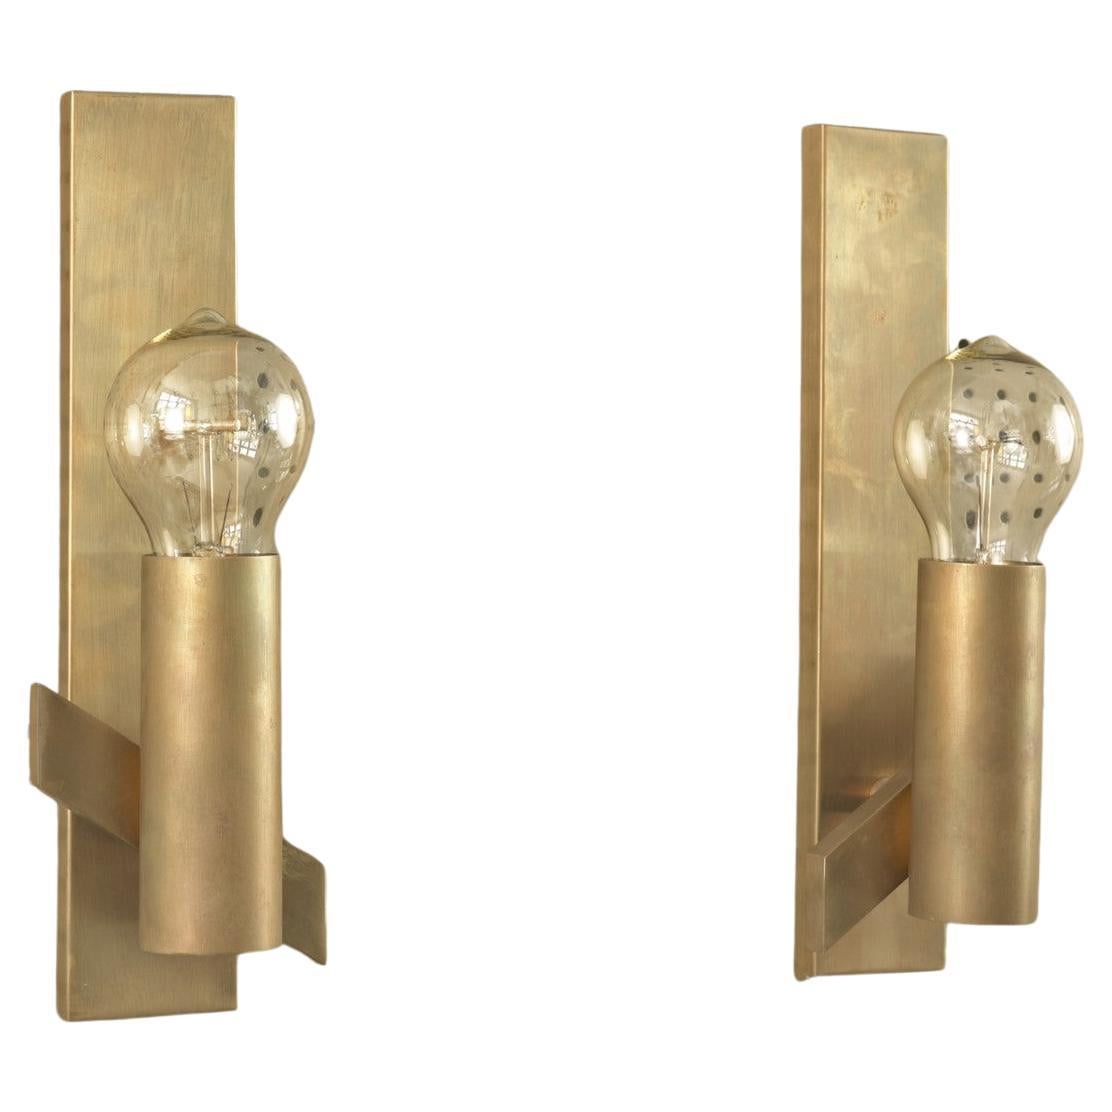 Pair of Brass Wall Lights, Germany - 1960 For Sale